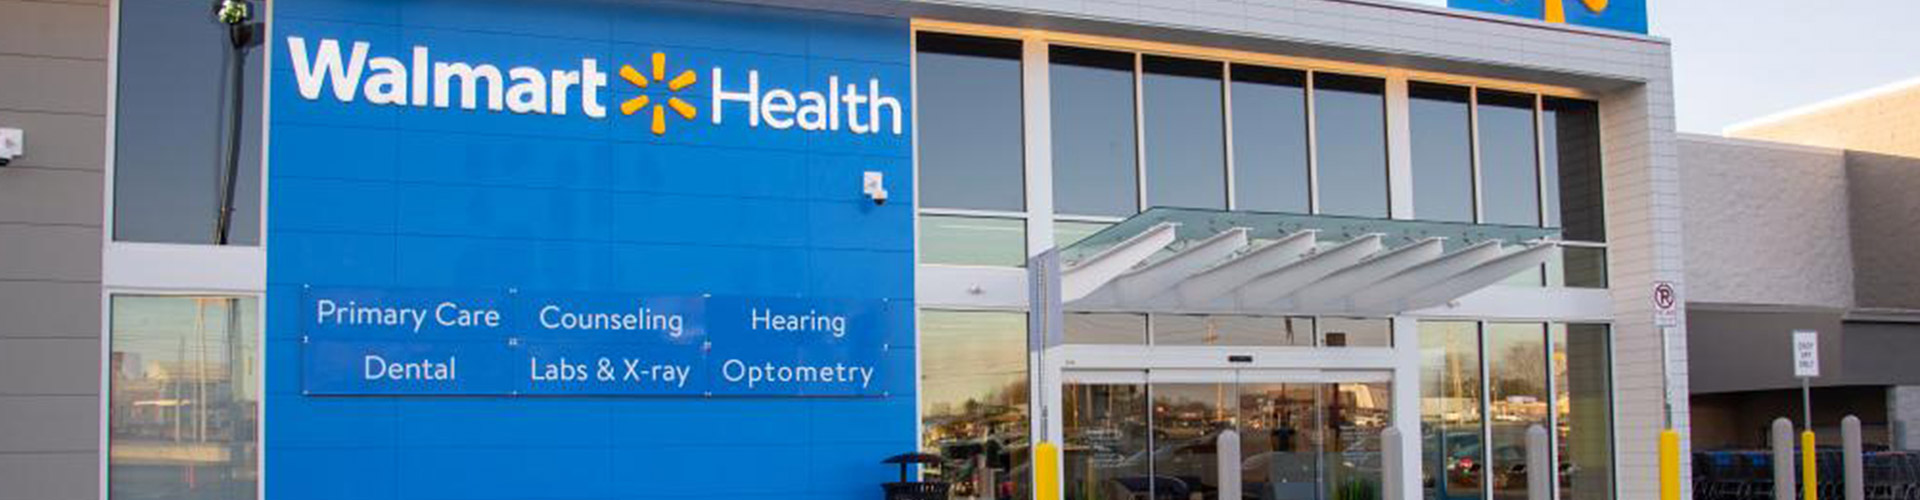 ‘Medtailing’, Medical & Retail, Is Here To Stay blog banner featuring storefront of Walmart Health